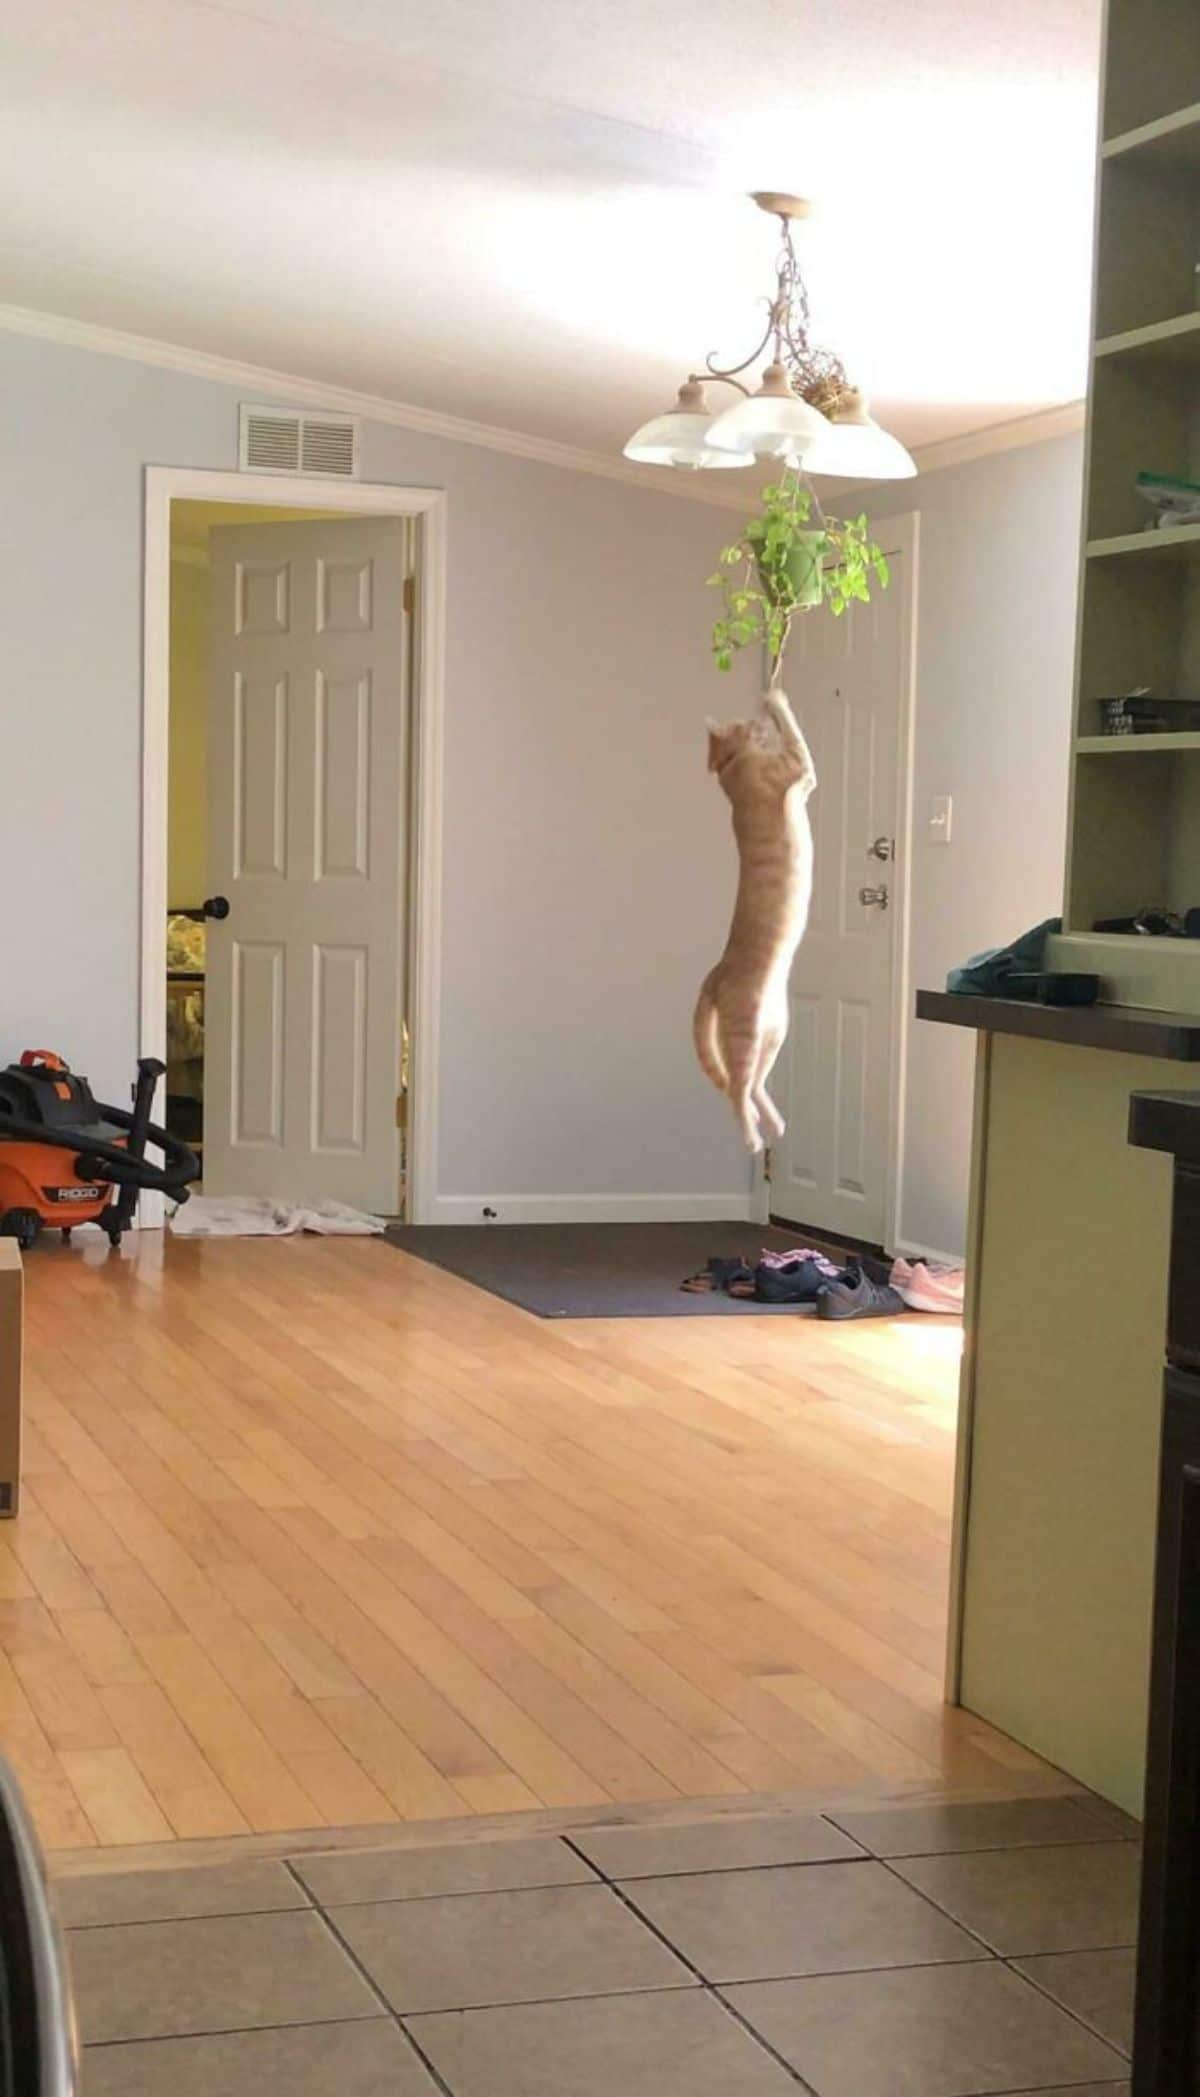 orange cat biting and suspended from a plant hanging from a light from the ceiling